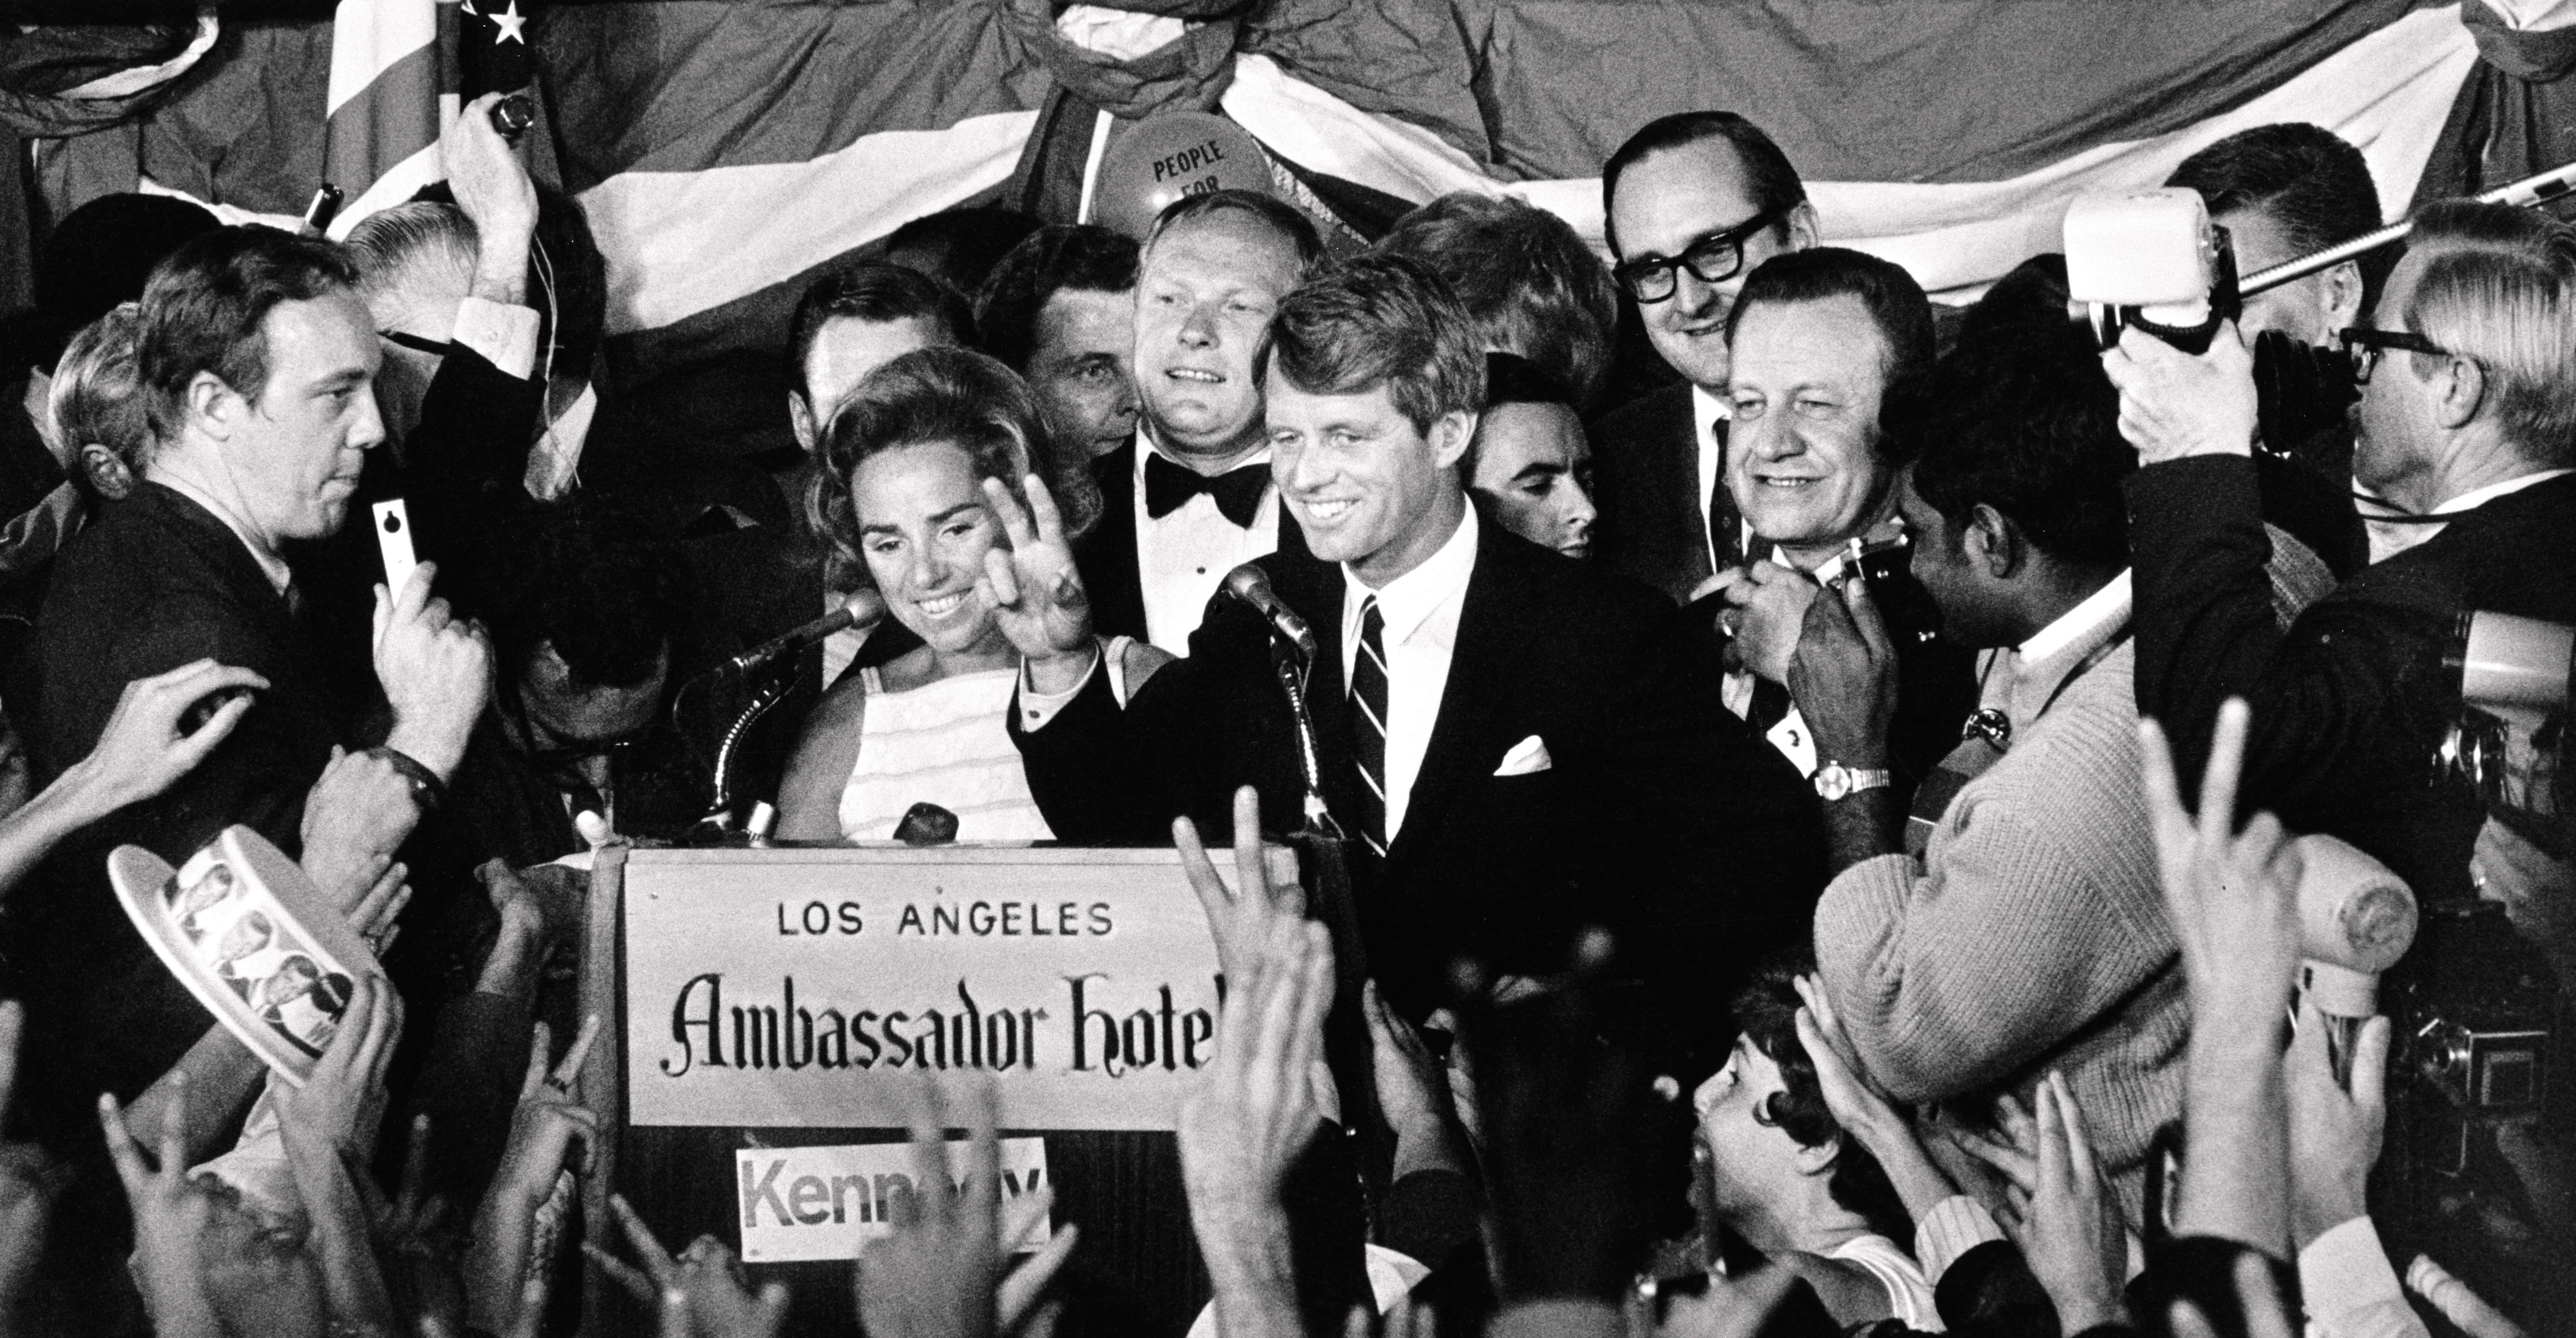 Sen. Robert Kennedy declares victory in California Primary. Minutes later he is shot.